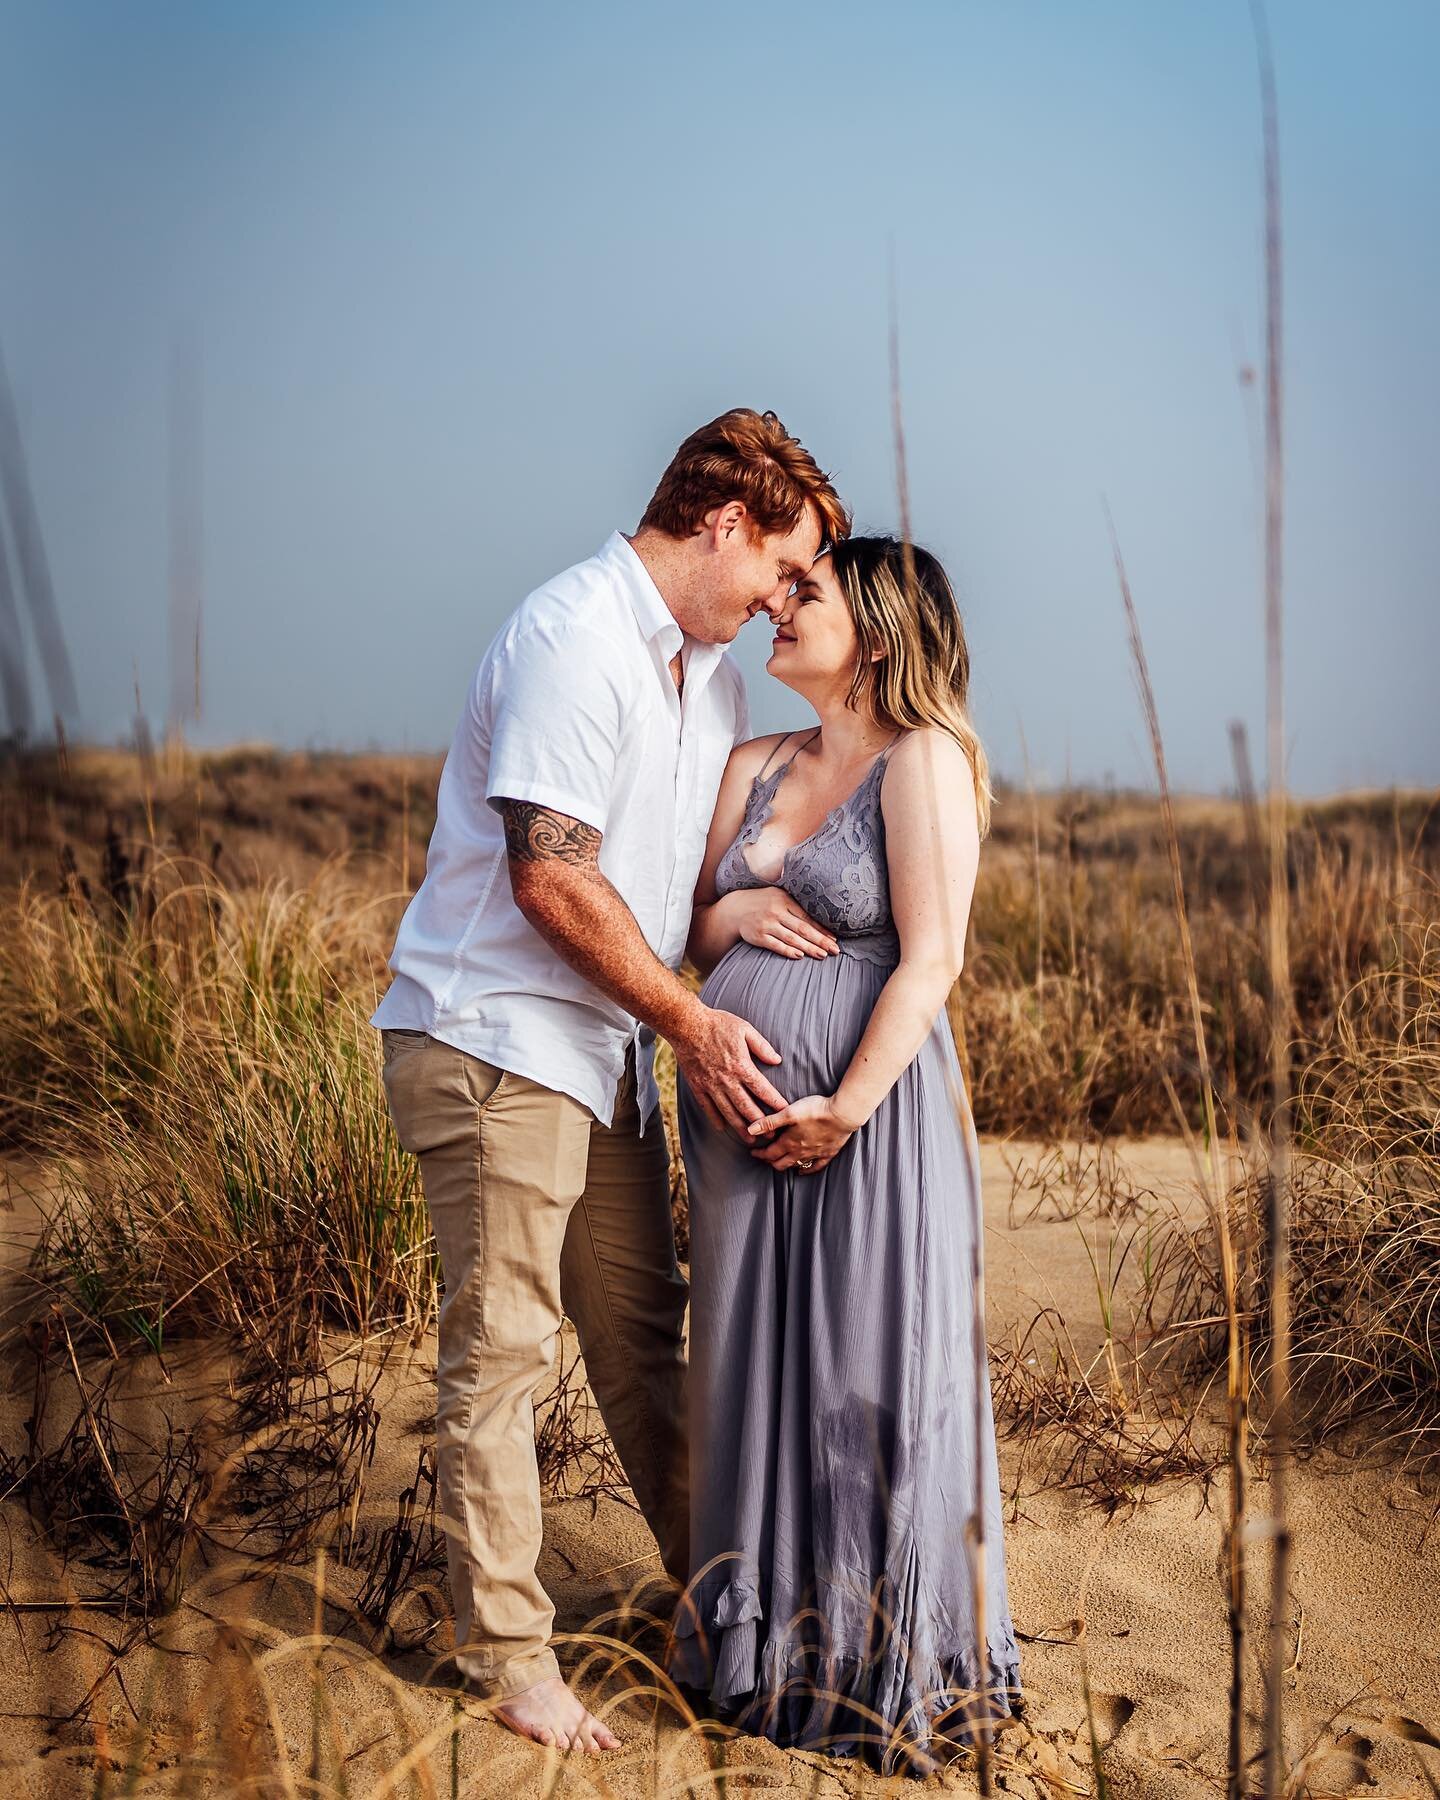 I met Jessica and Trey back in Hawai&rsquo;i when it was just them and their two adorable pups! We explored a botanical garden and the beautiful turquoise waters of Hawaii. 
AND! I even got to photograph her maternity photos of Colton before they lef